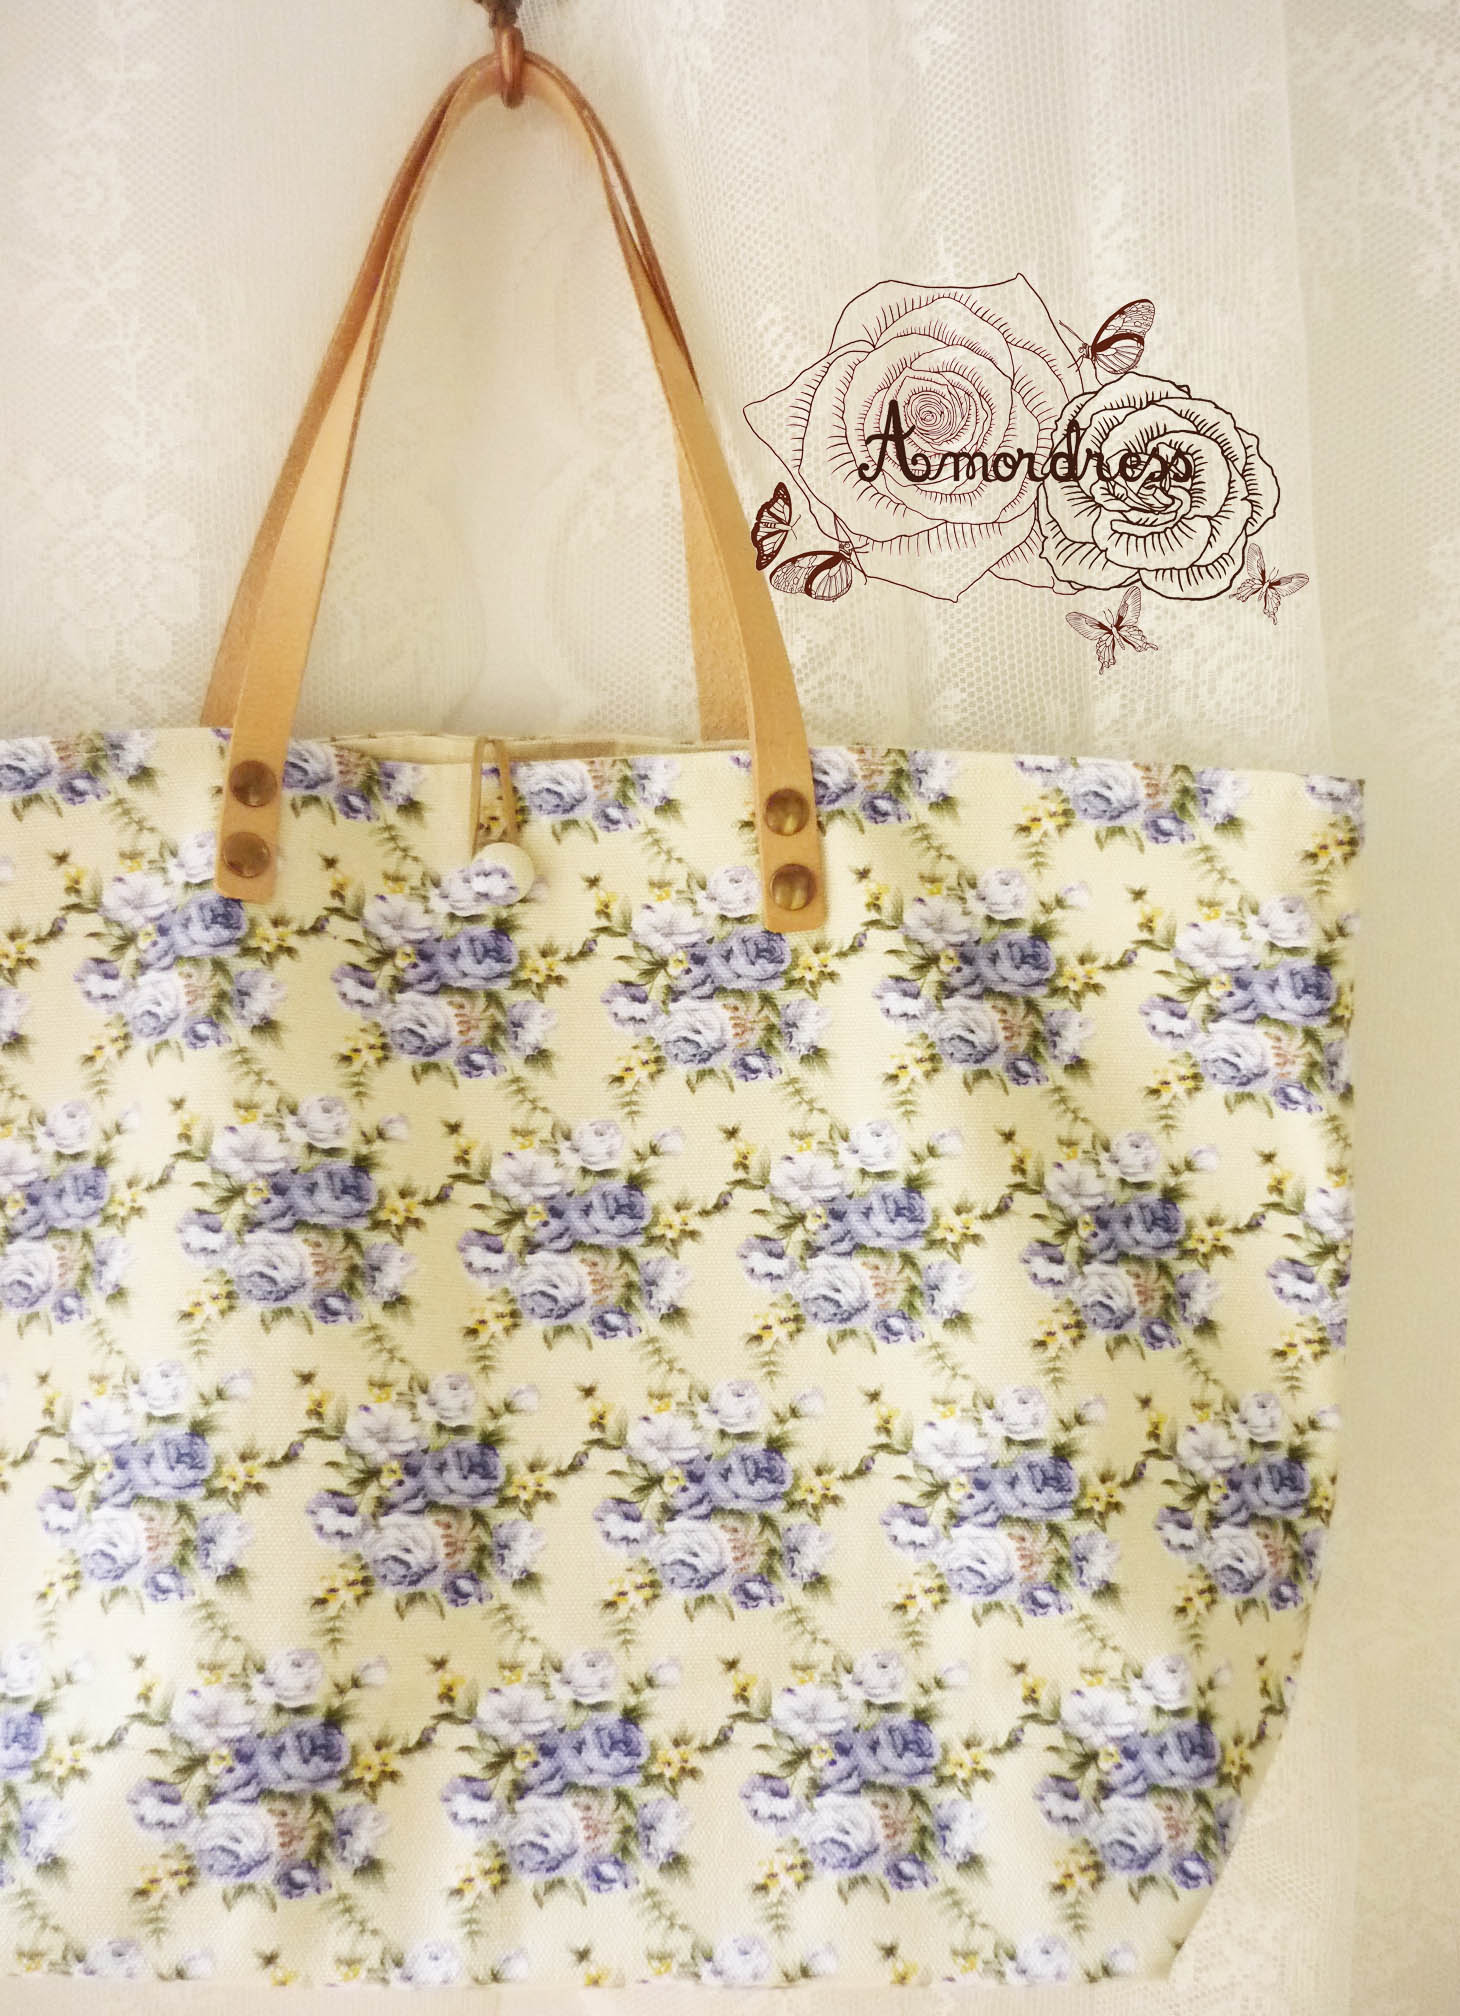 Floral Tote Bag Printed Canvas Bag Genuine Leather Strap Cream With ...